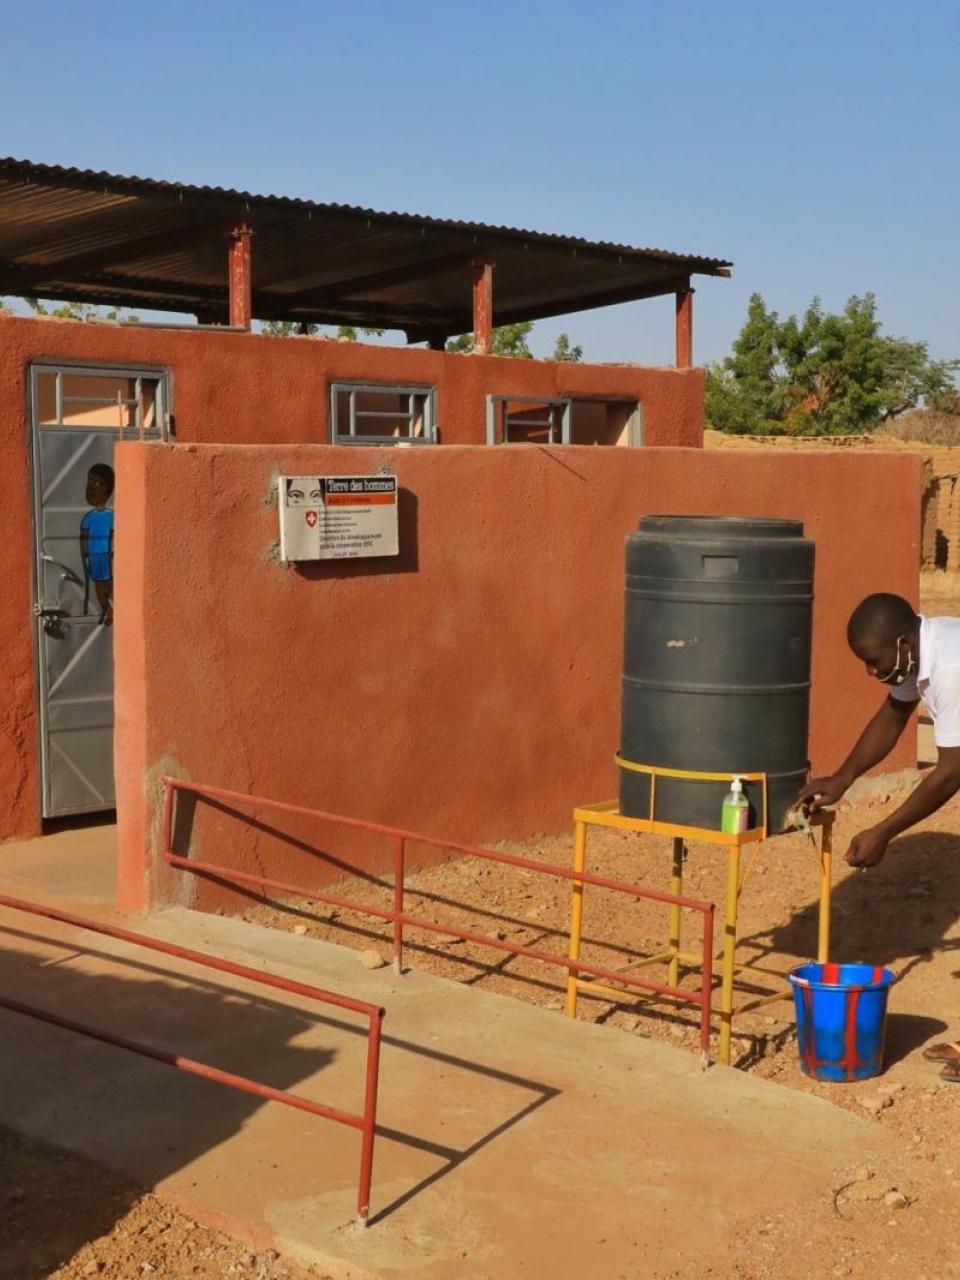 The Swiss consortium for water and sanitation strives to provide dignified sanitation infrastructures adapted to the mobility of everyone in Mali © Terre des hommes